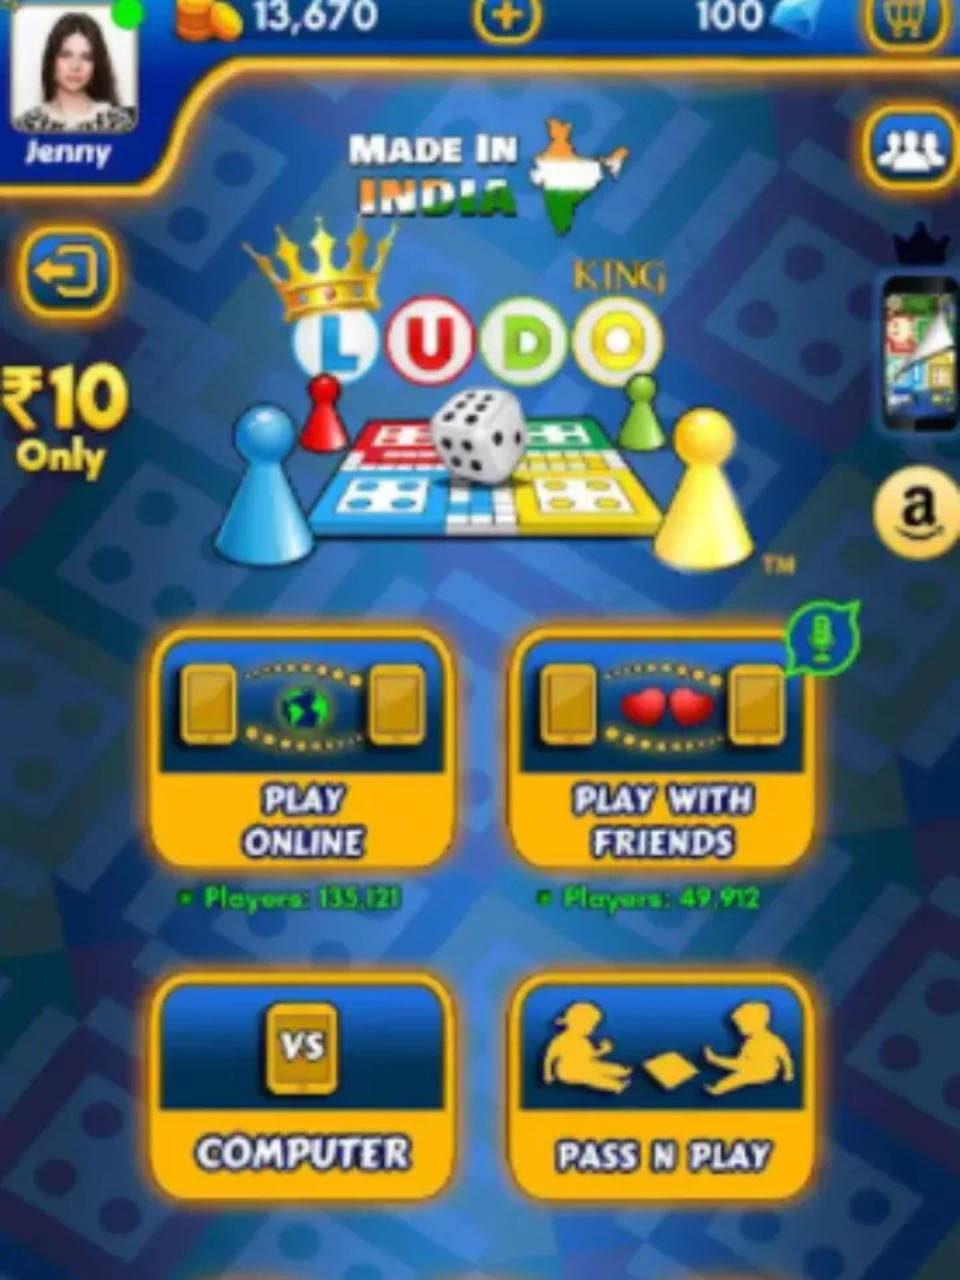 How to play Ludo King online with friends